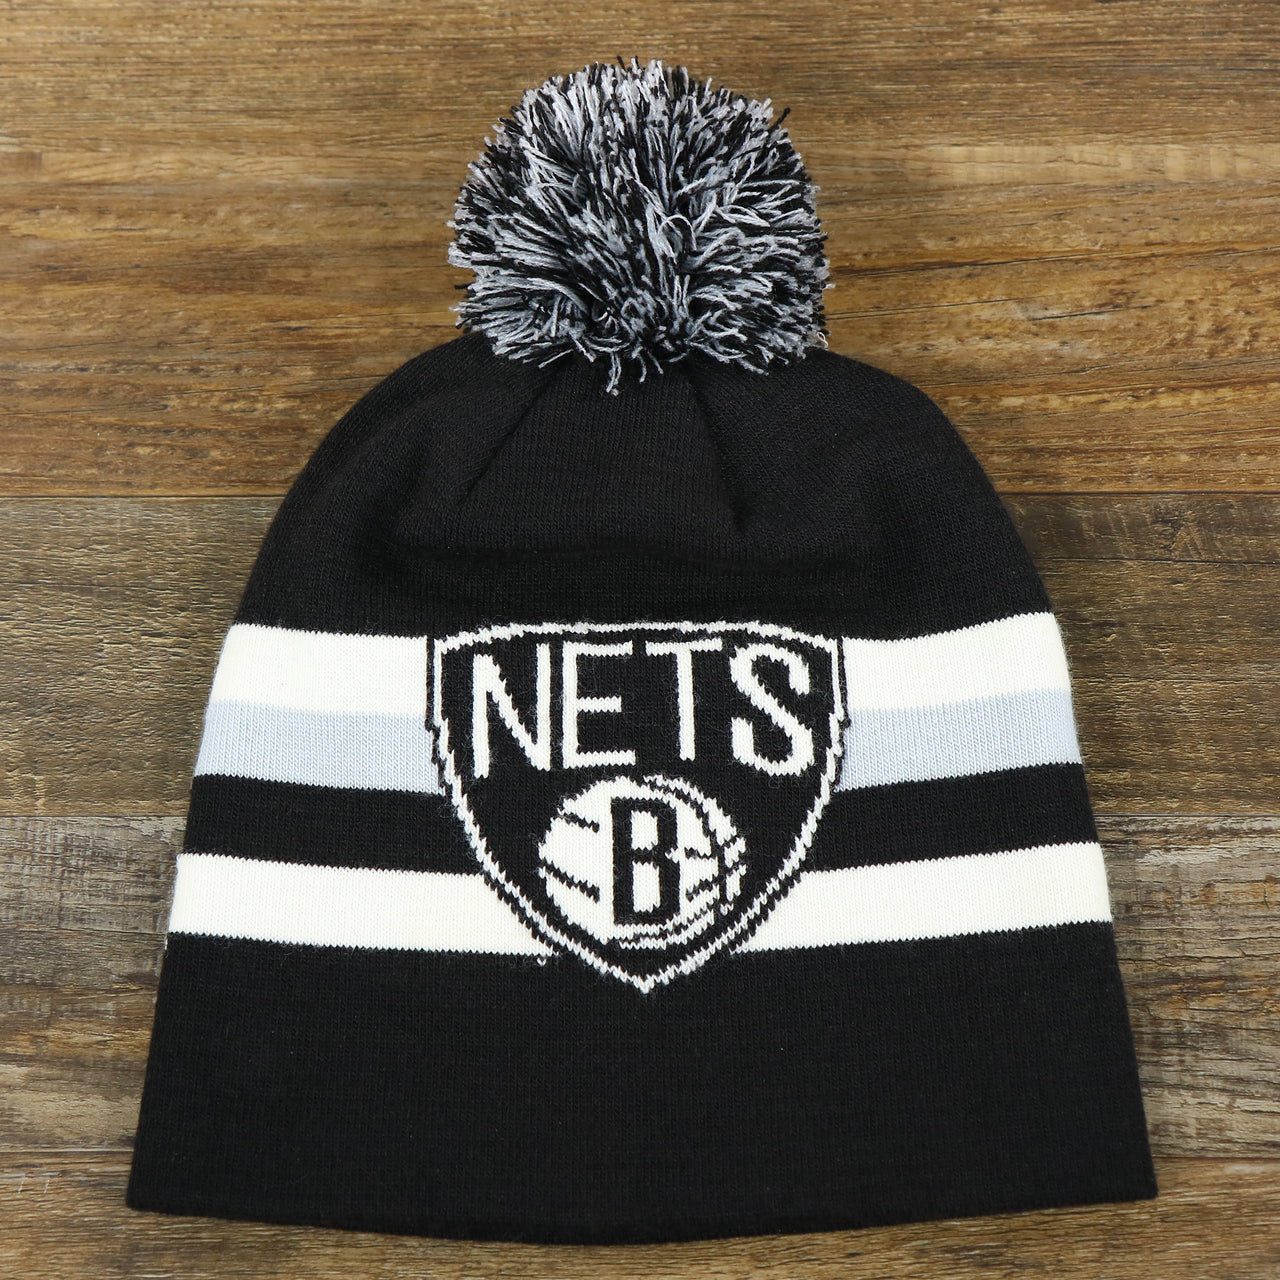 The front of the Brooklyn Nets Cuffless Striped Winter Beanie With Pom Pom | Black, White, And Gray Beanie